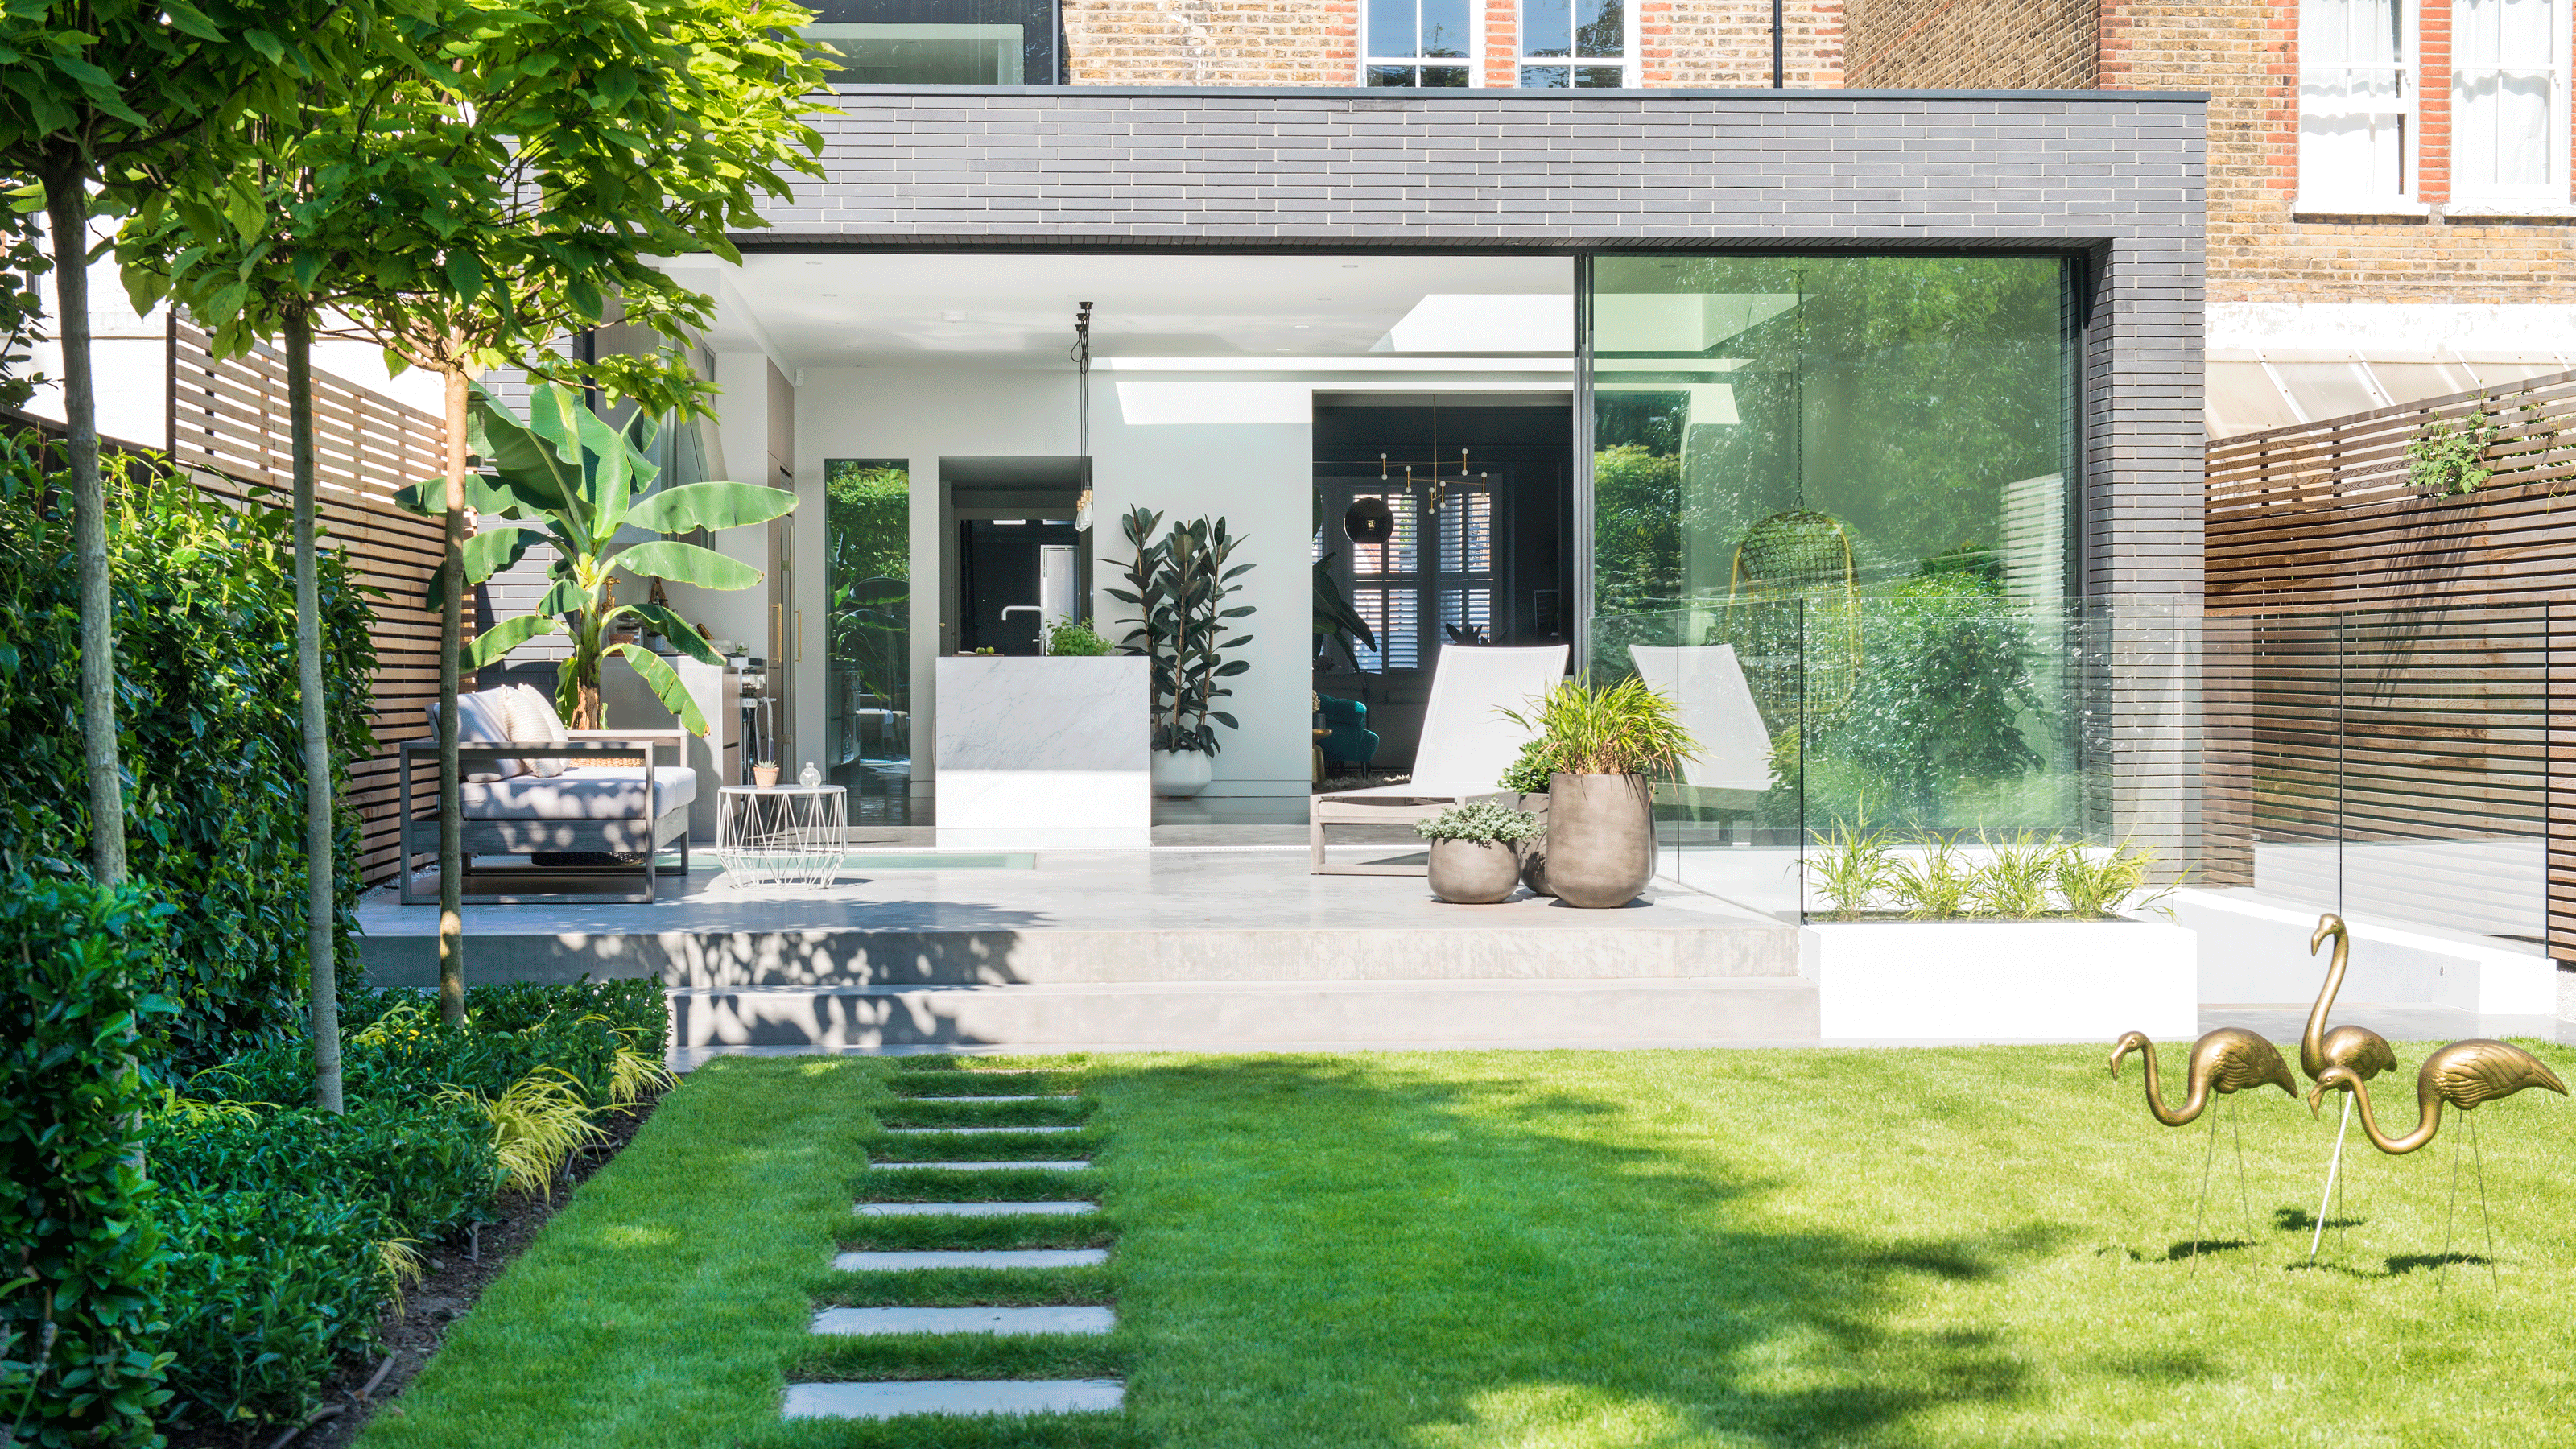 Green lawn with white paving slabs showing how to plan a garden